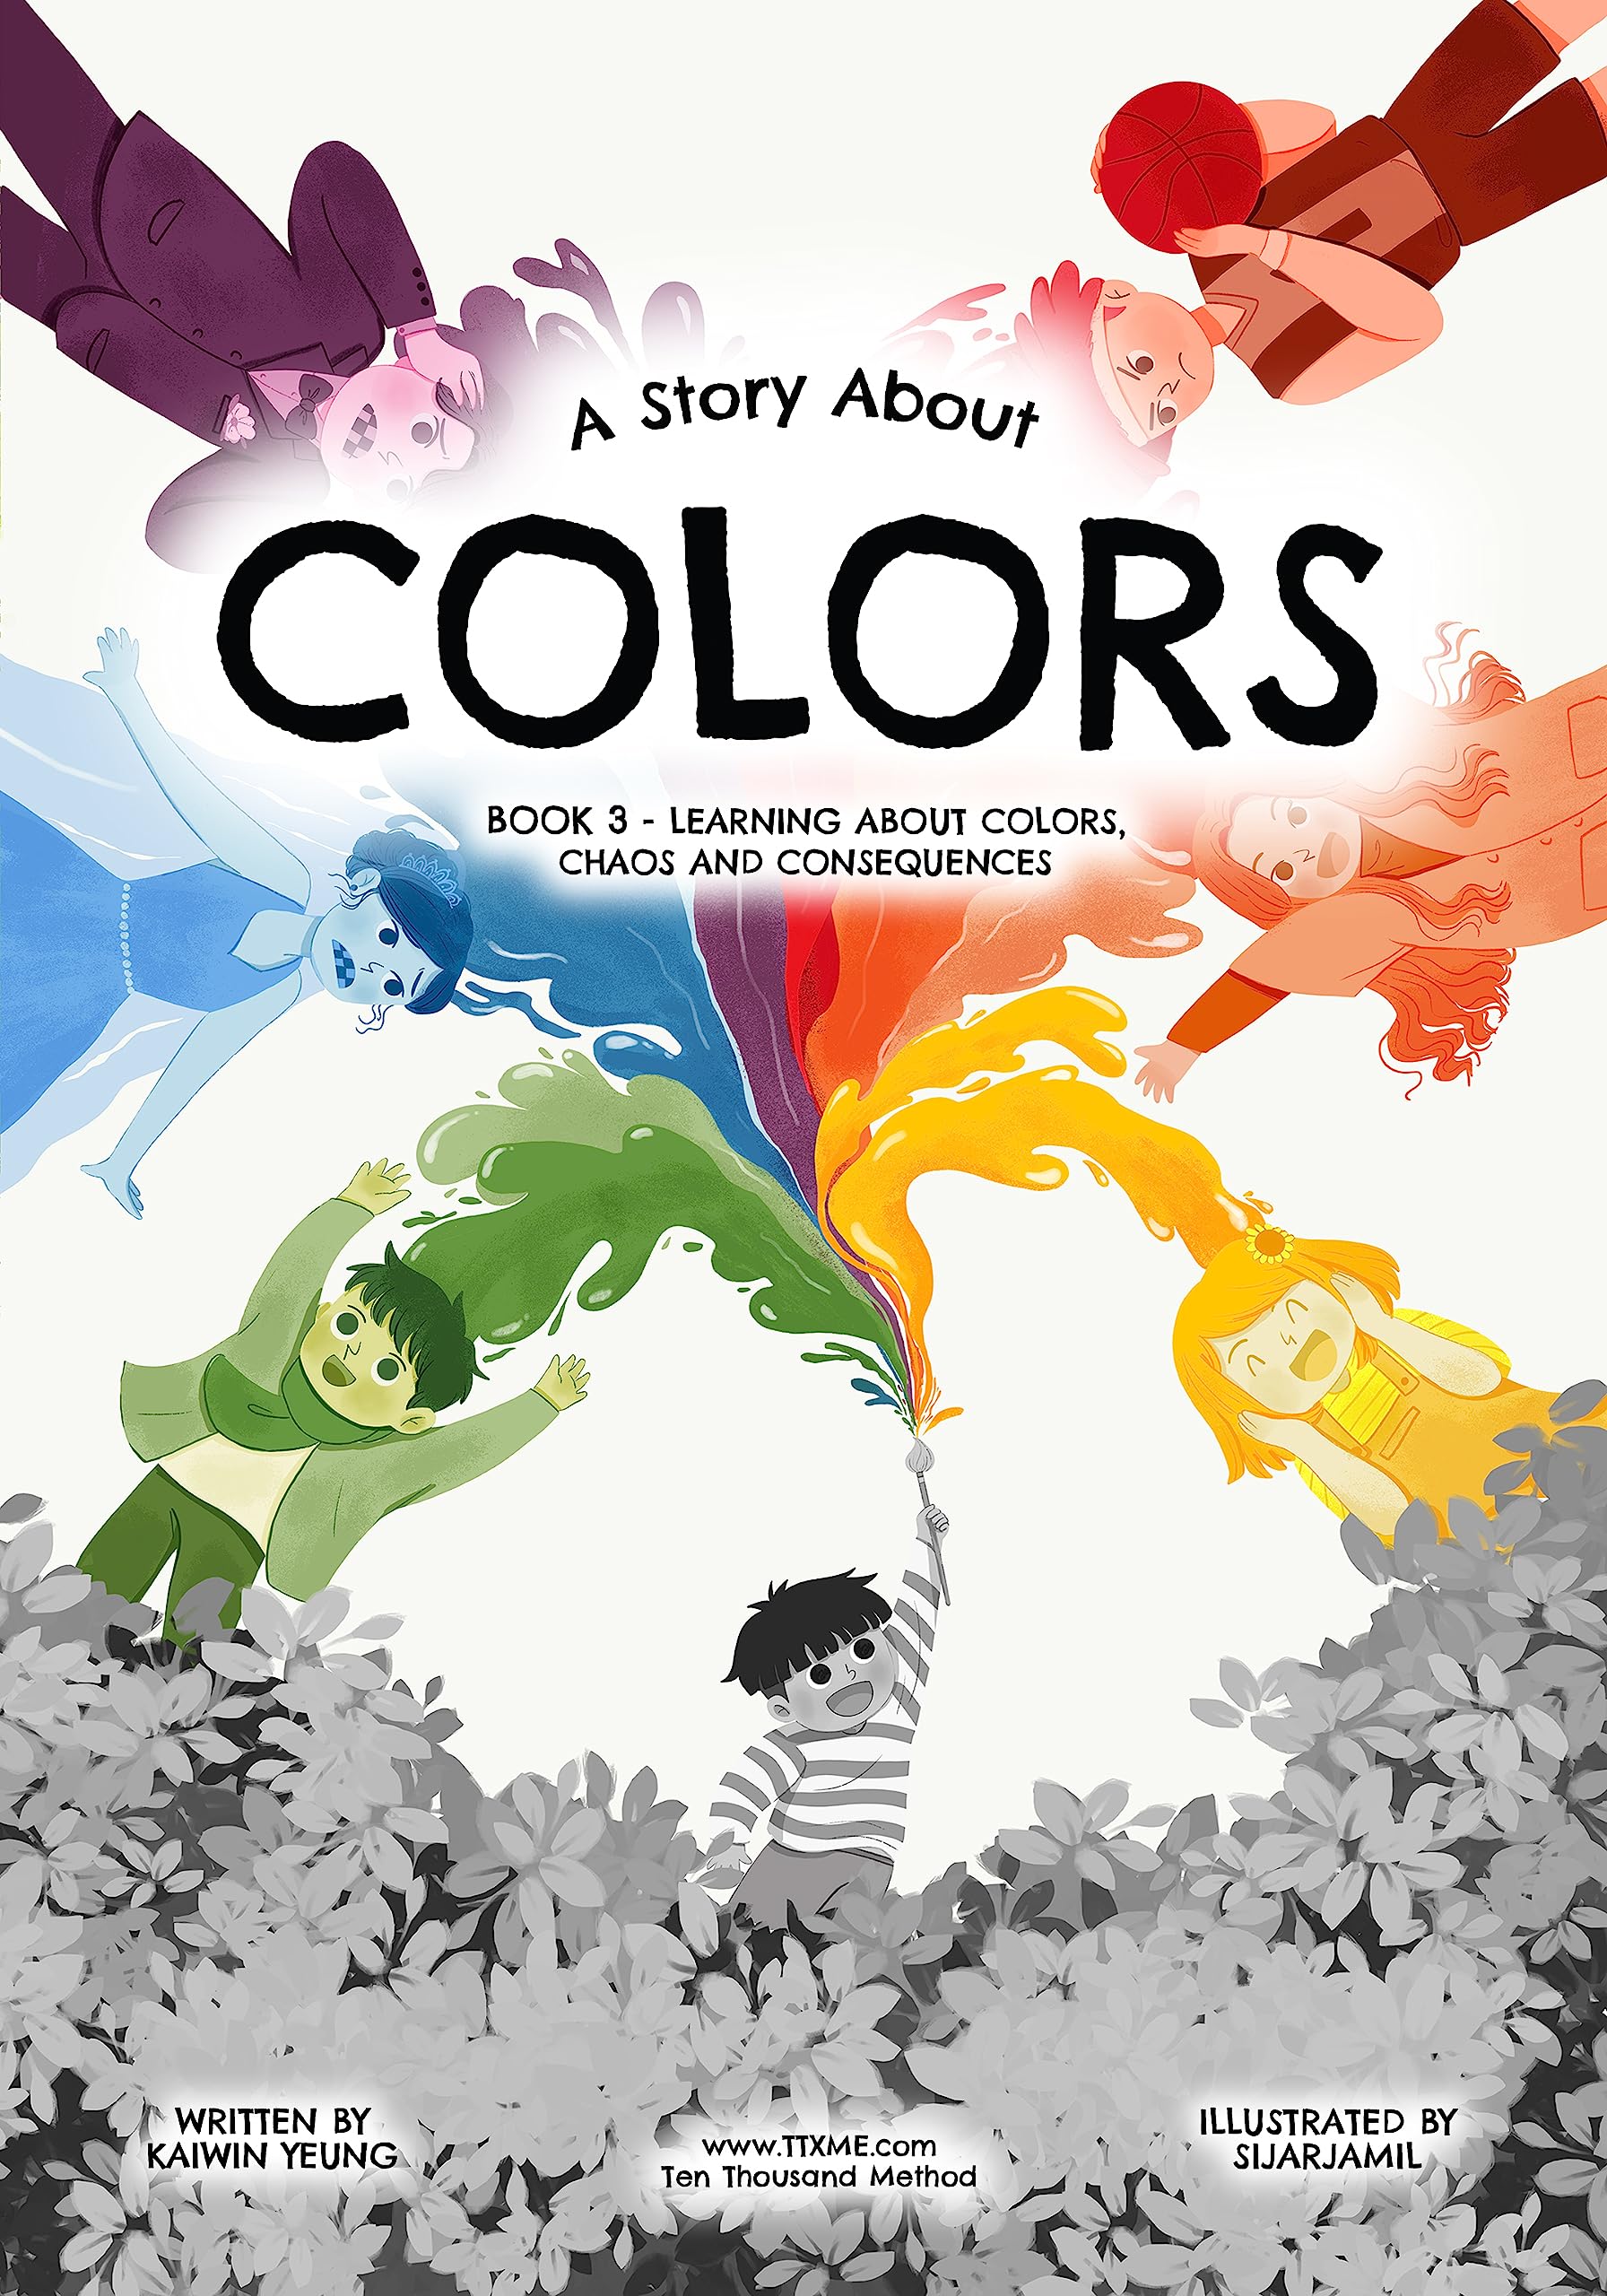 A Story About Colors: Book 3 - Learning about colors, chaos and consequences. (Stories About Learning: An Educational Book Series)